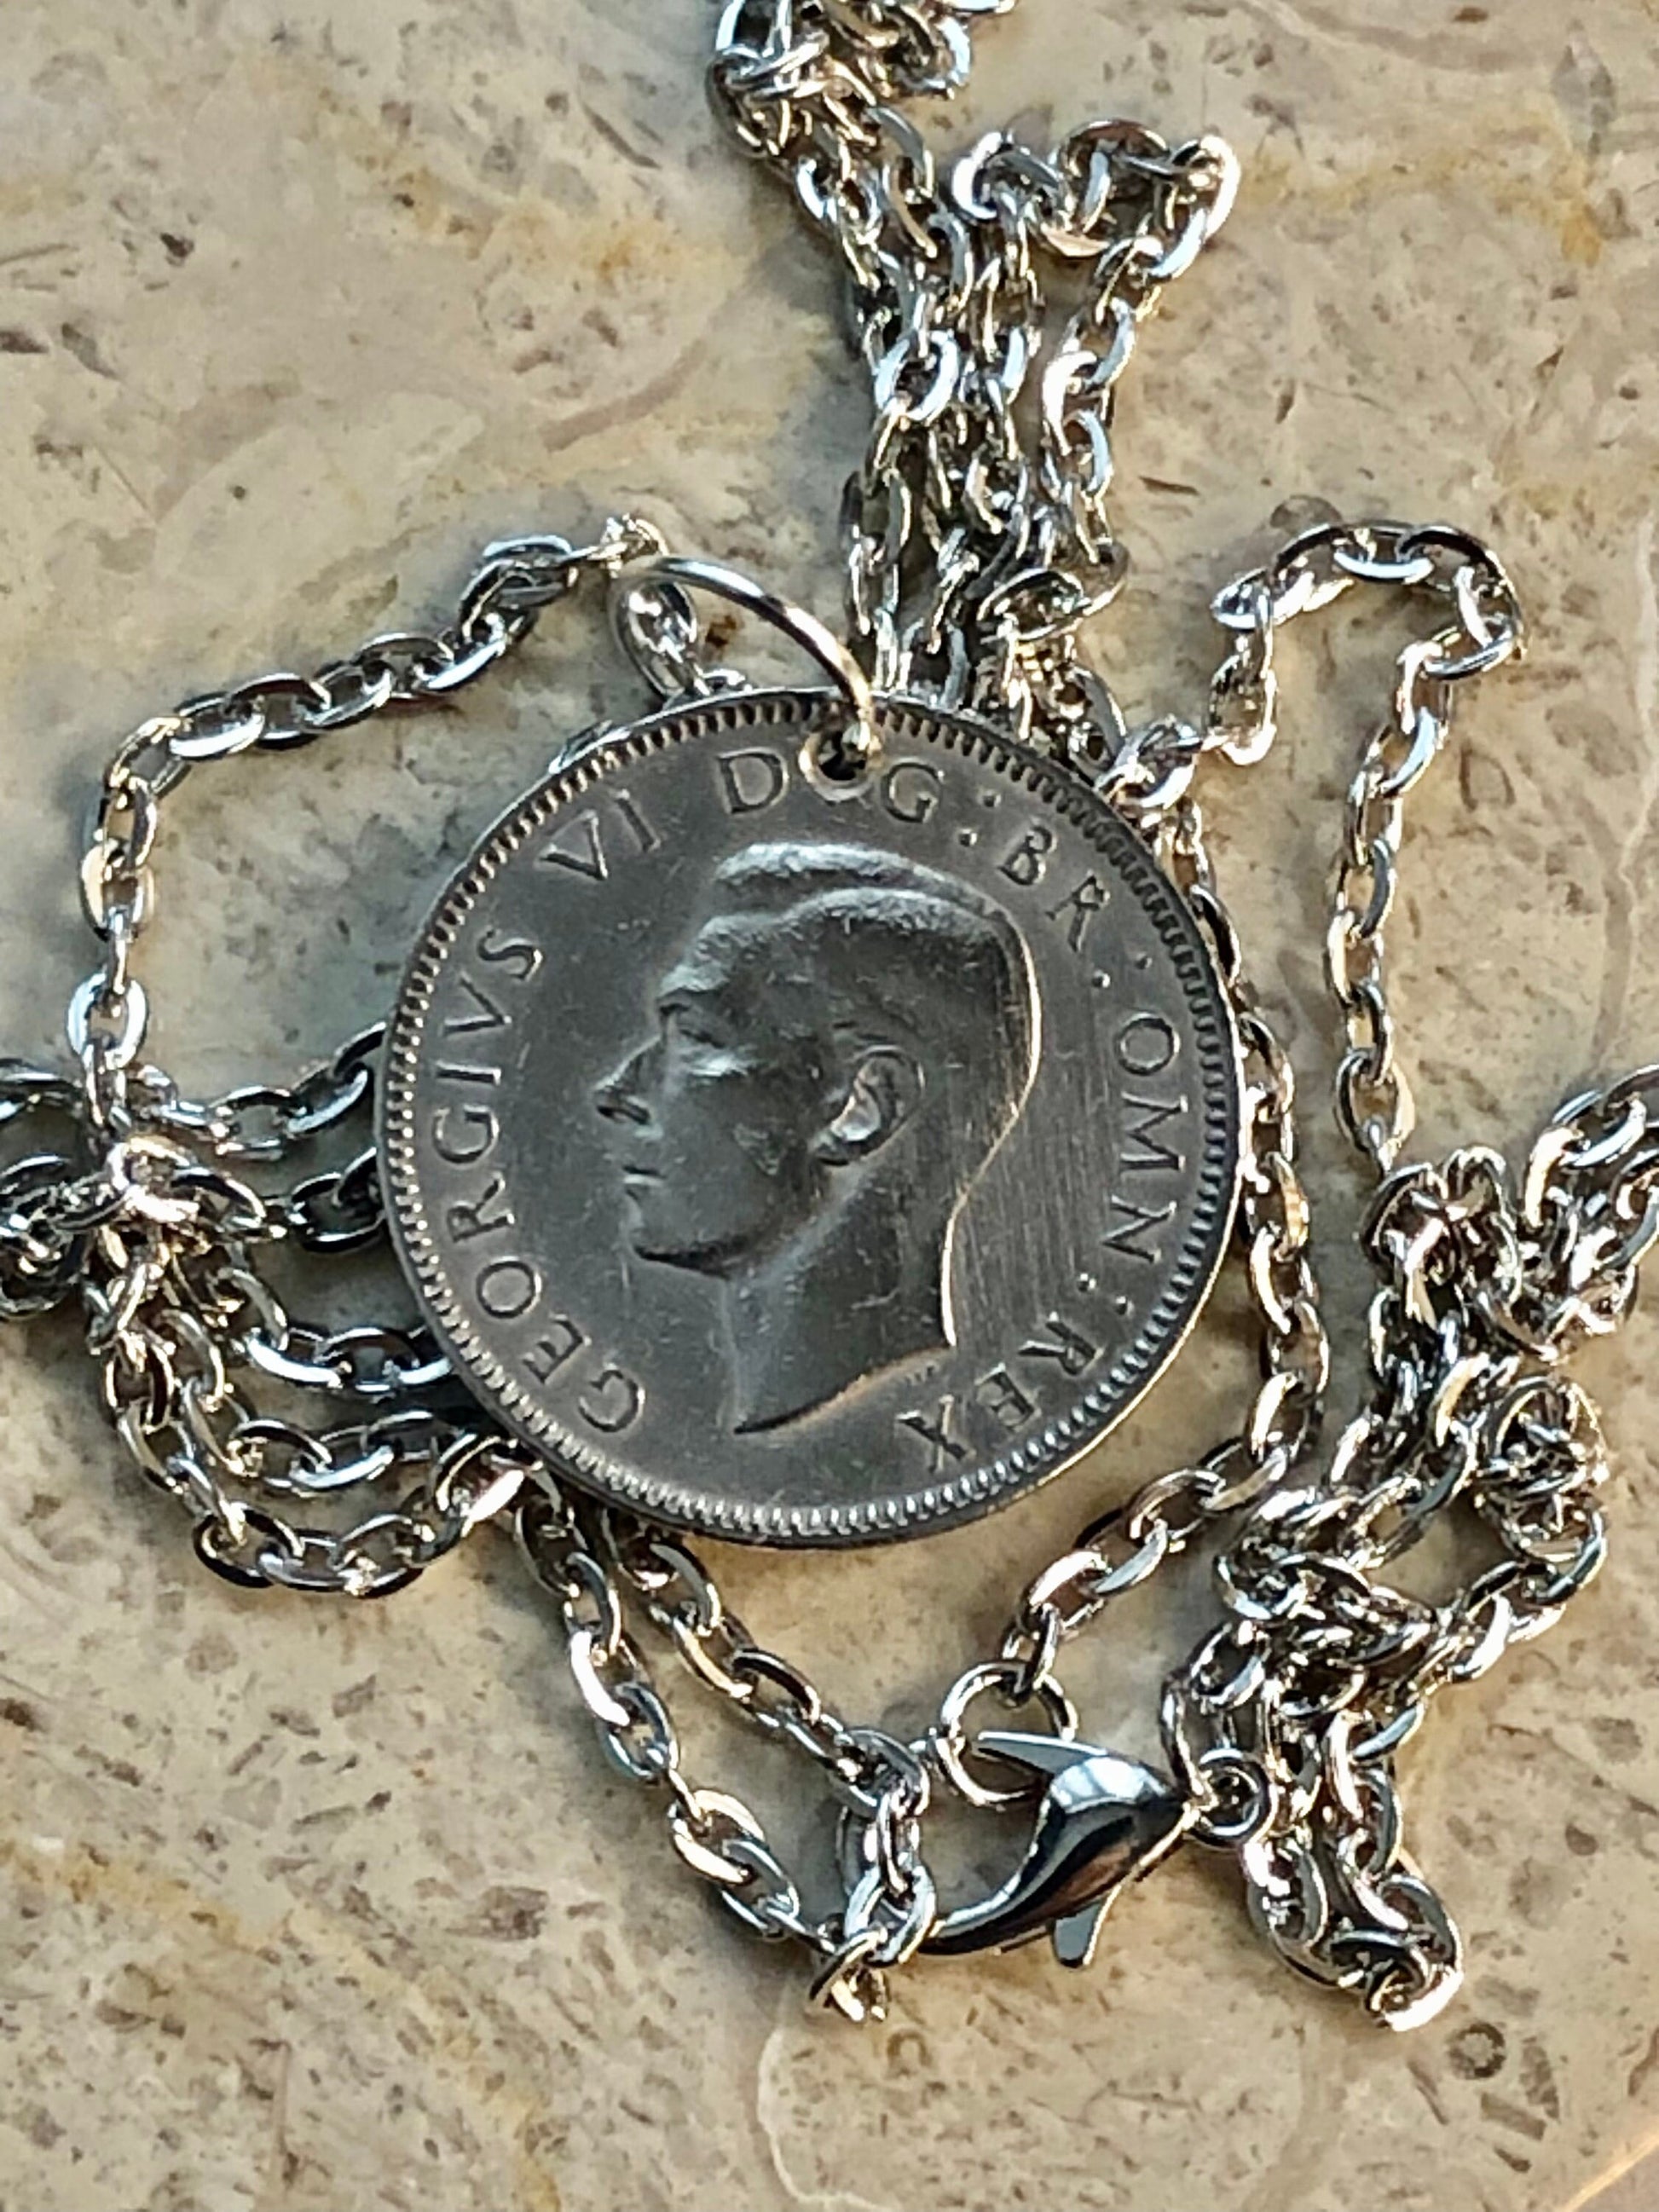 Britain Coin Pendant One Shilling Rhinestone Jewelry England Necklace Charm Friend Coin Charm Gift For Him, Her, Coin Collector, World Coins